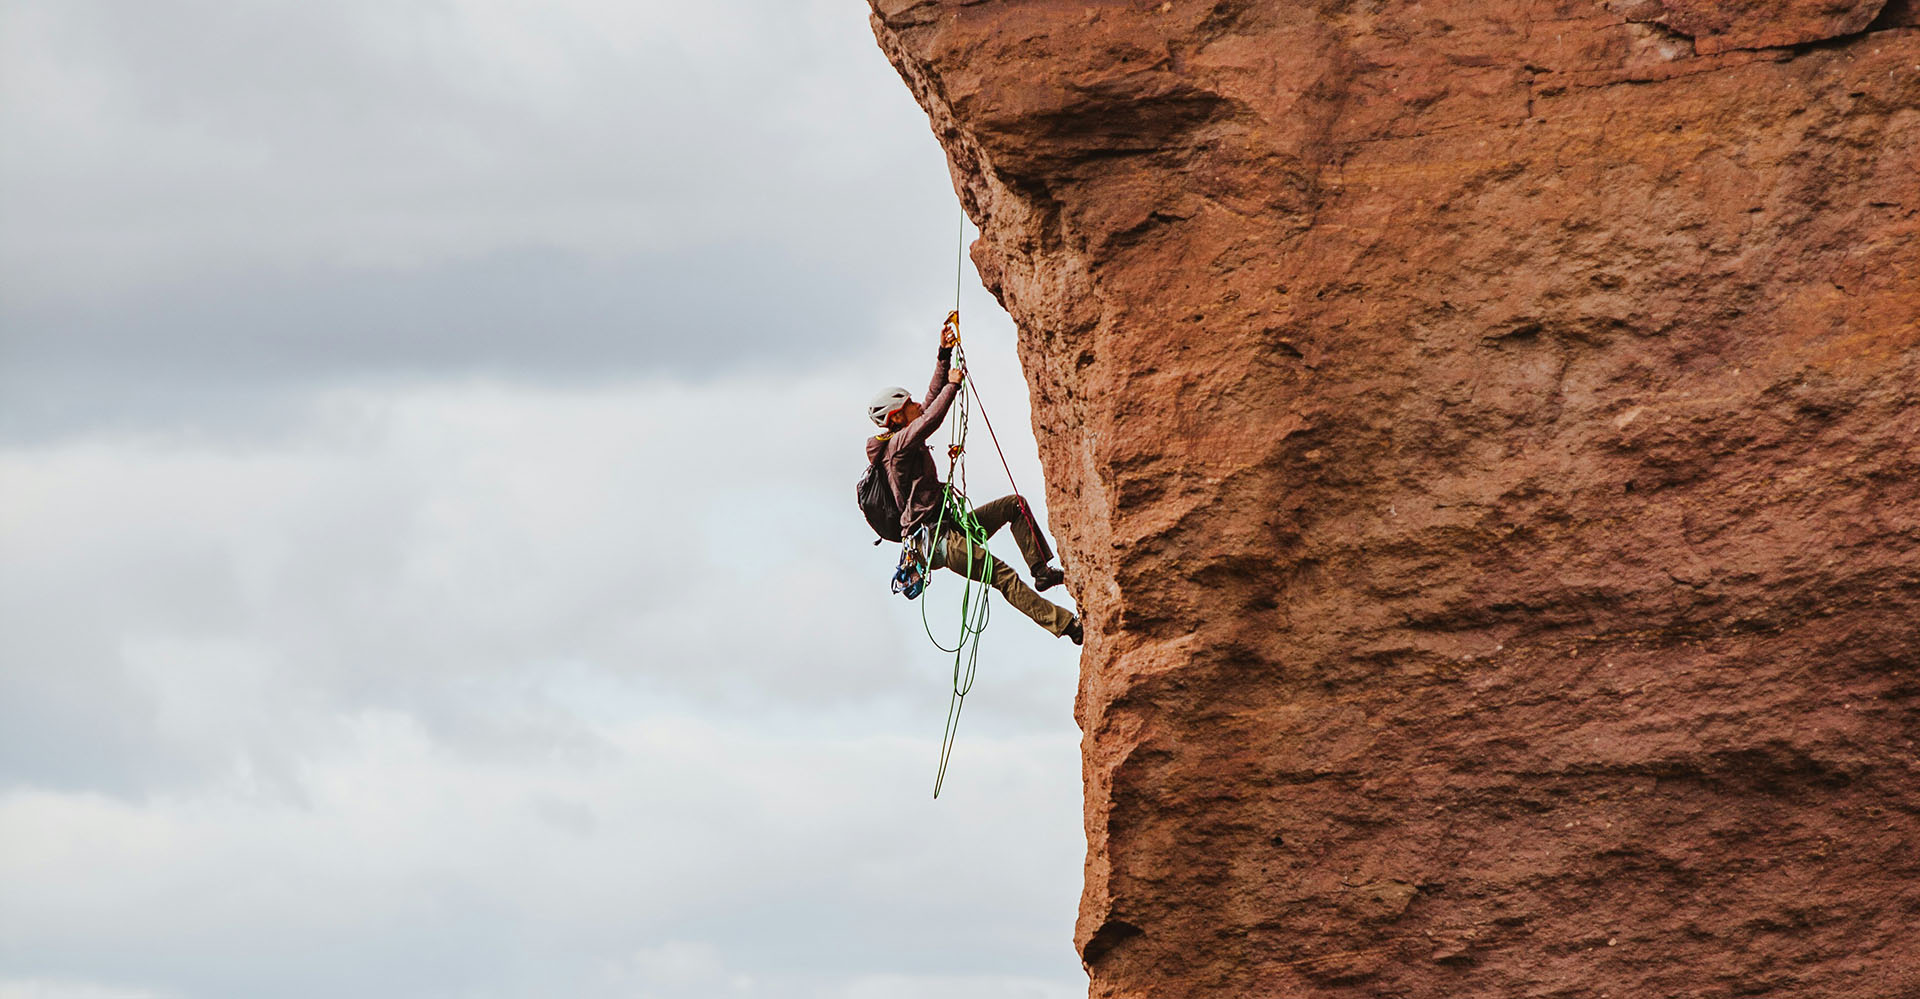 person climbing a cliff of red rock, Sheaff Brock investment advisors blog, retail consumers